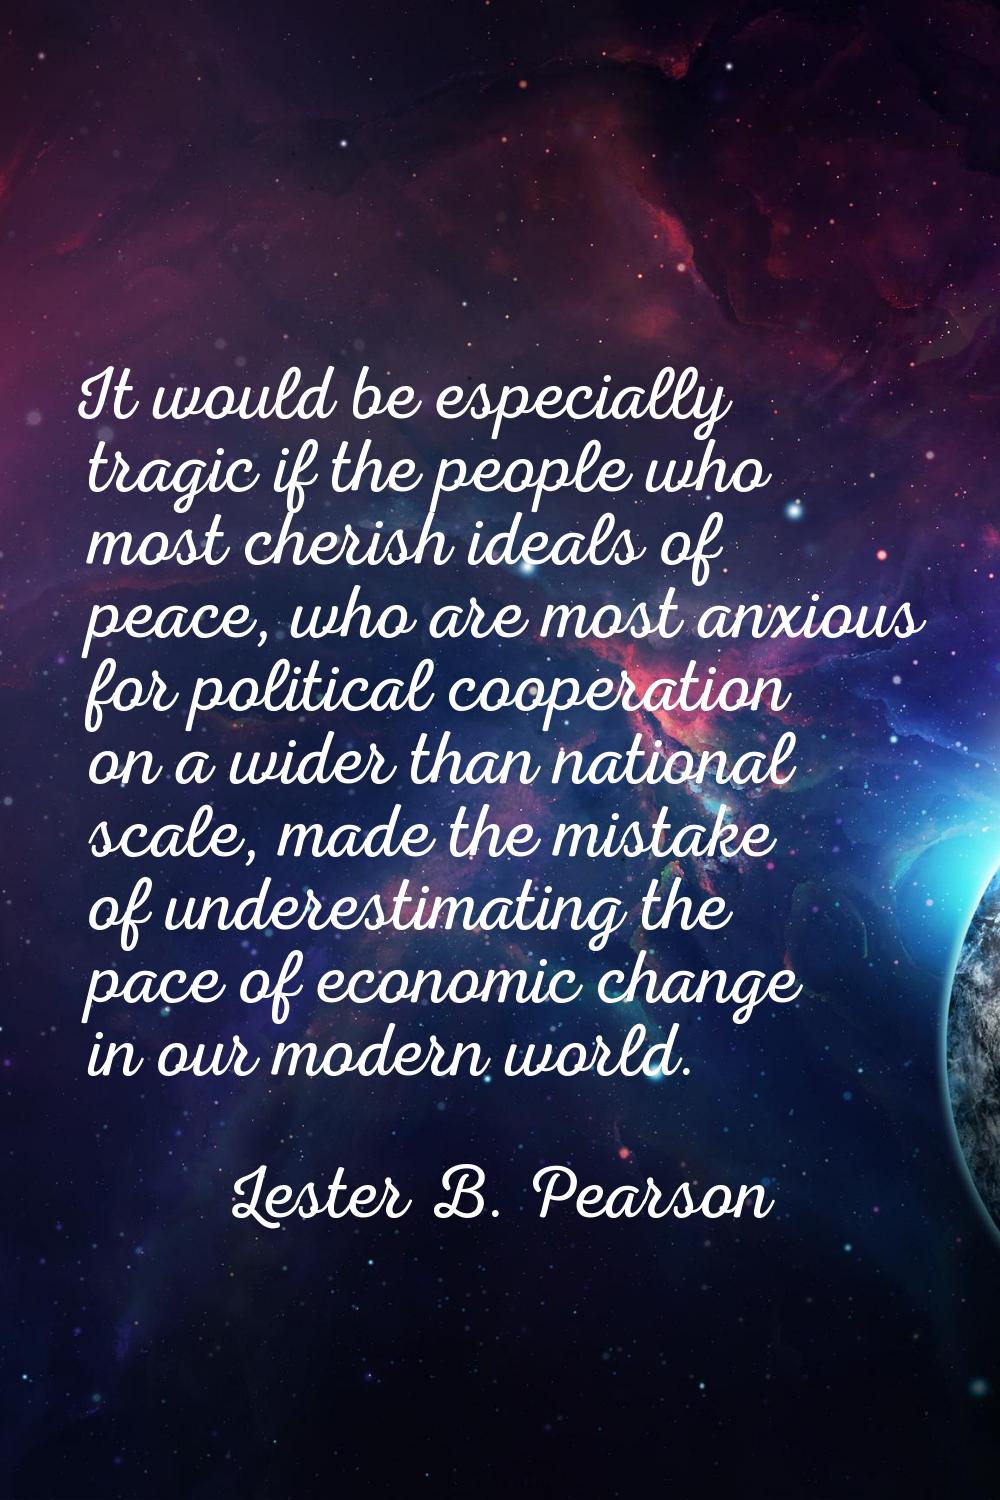 It would be especially tragic if the people who most cherish ideals of peace, who are most anxious 